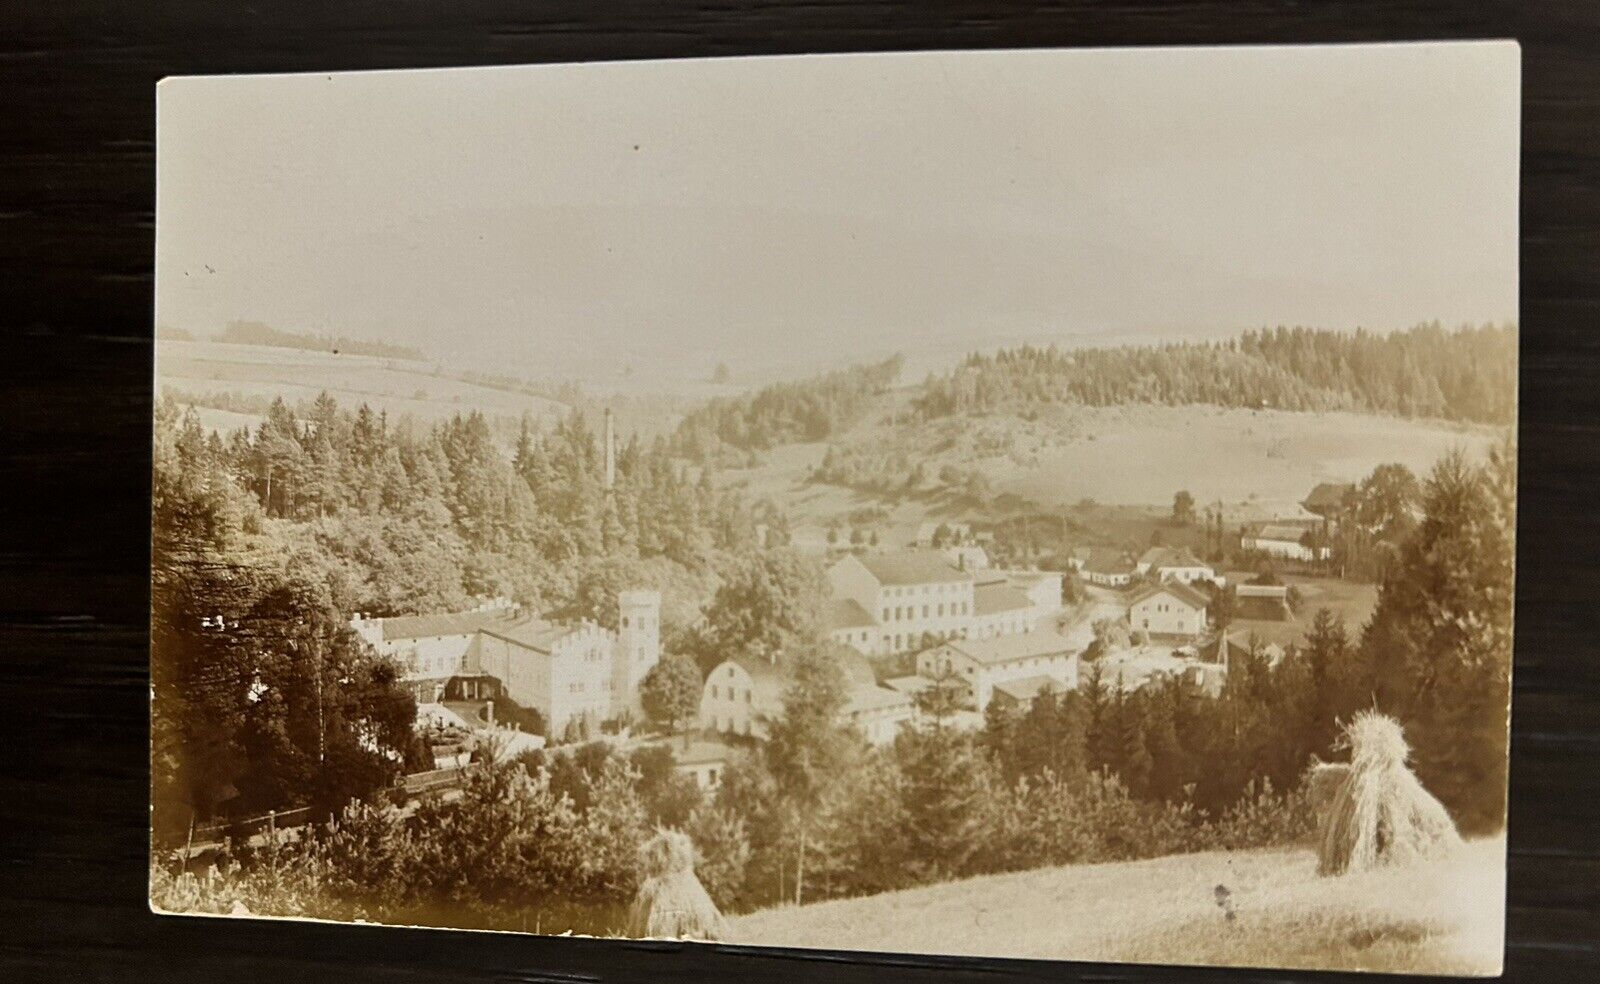 Austria 1900s - Real Photo Postcard Of A Small Village 